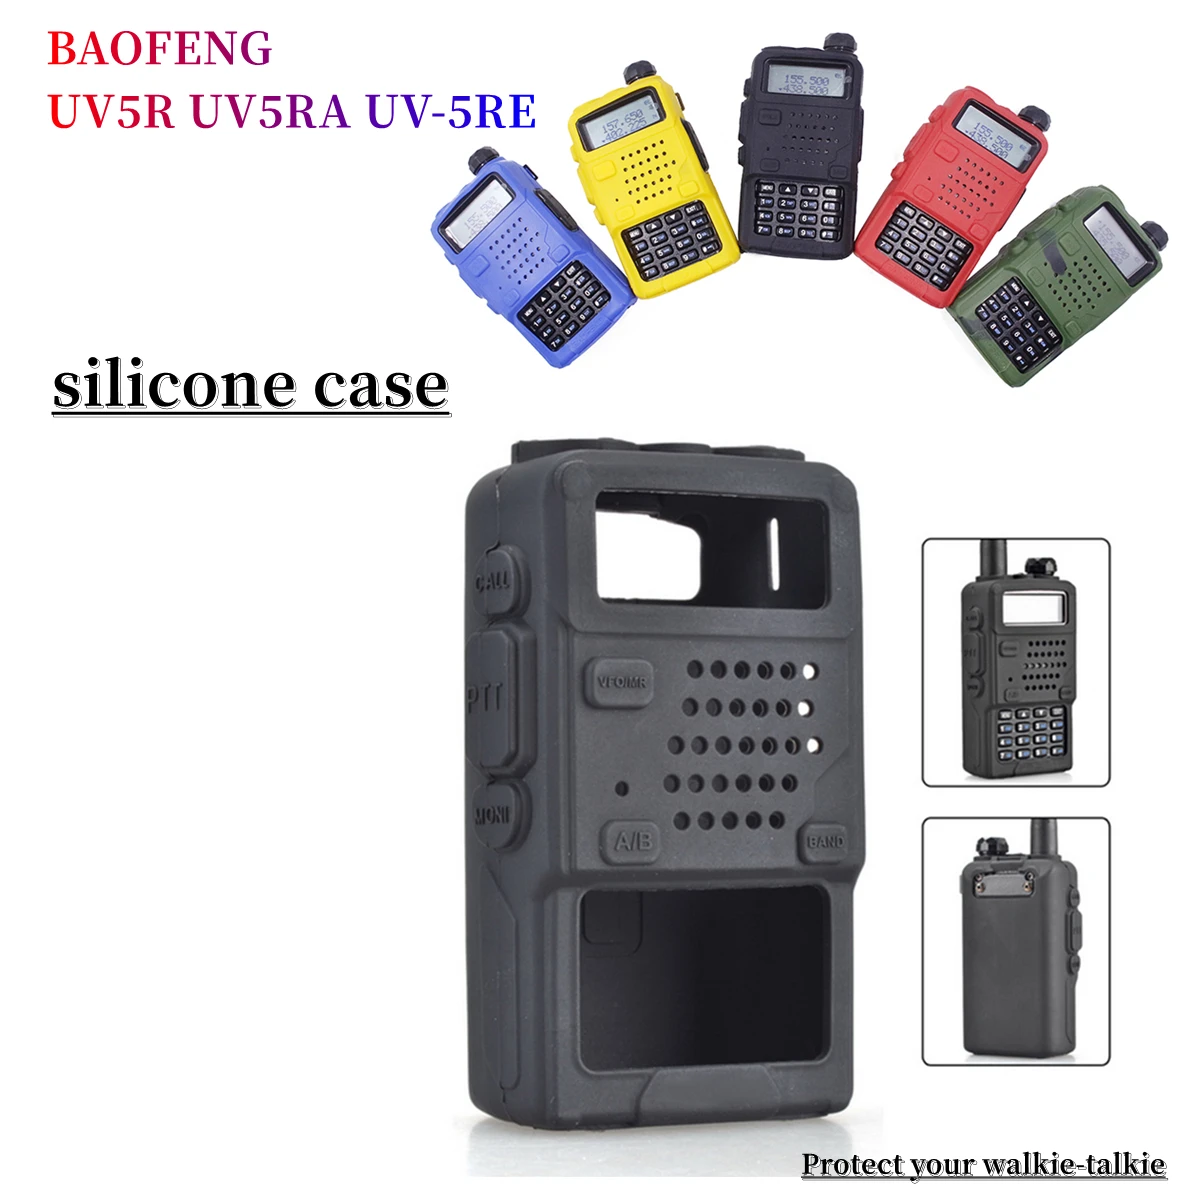 NEW Case Bag for Baofeng UV-5R UV5R UV5RA UV-5RE Plus F8 Protective Cover Walkie Talkie Two Way Radio Protection Soft Silicone